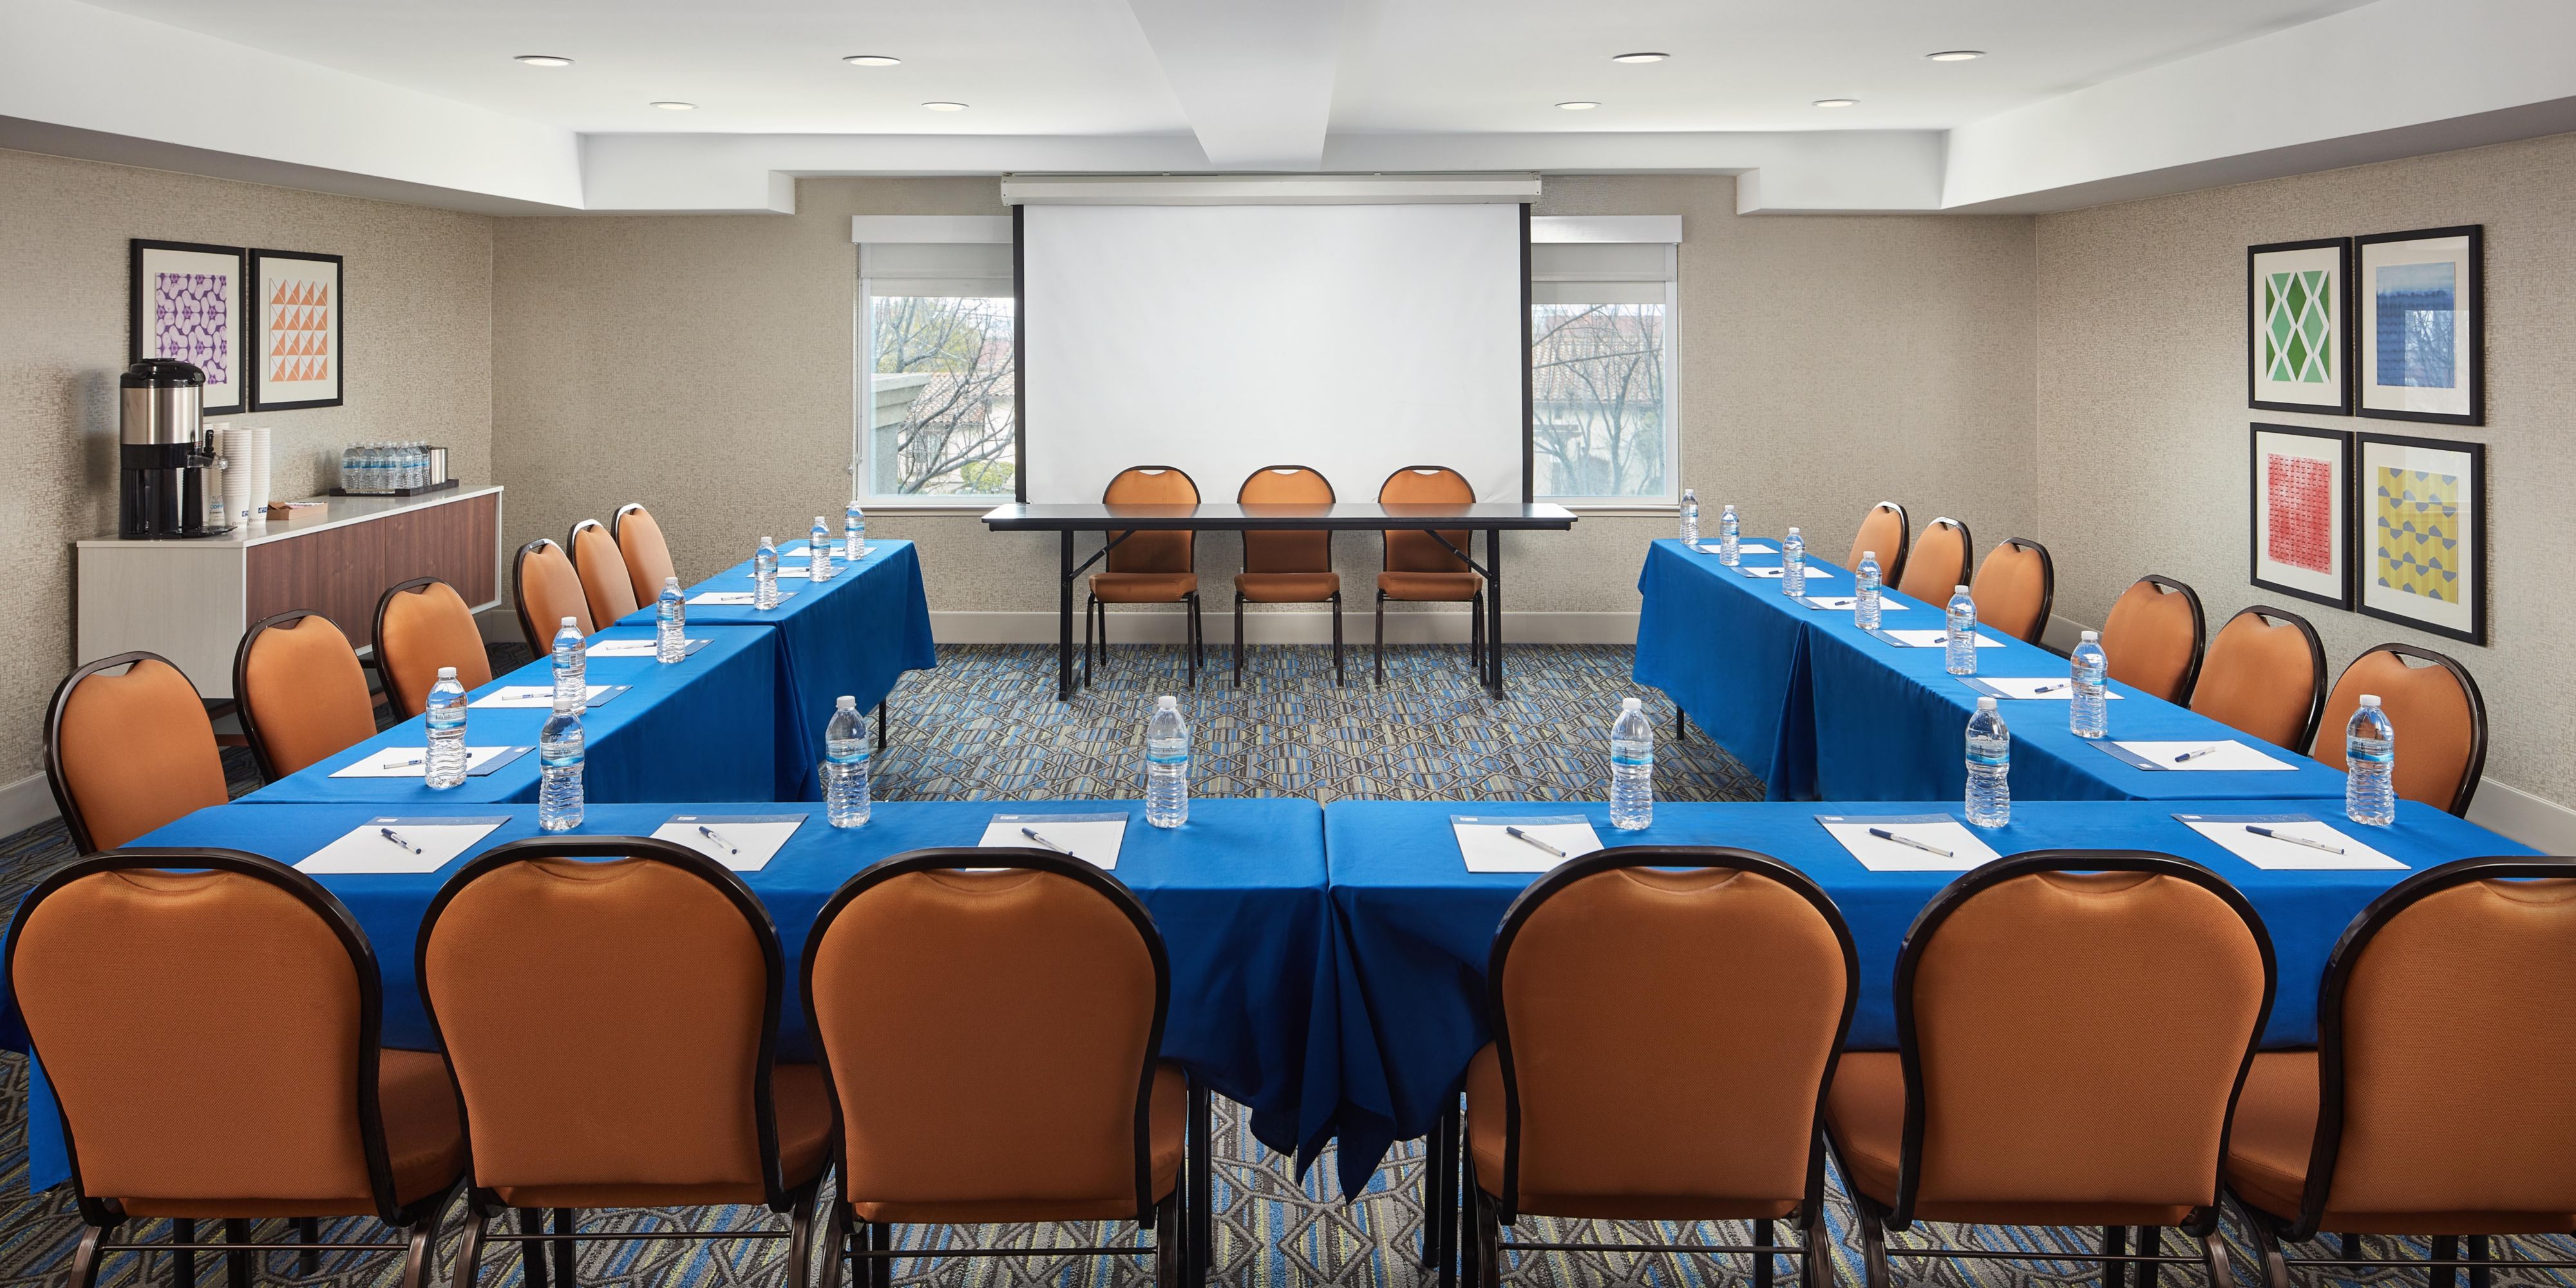 Find your space with us! Our property features 705 sq ft of meeting space. We make planning easy so you can focus your time on making your meeting a success. Free LCD projector and screen with booking.